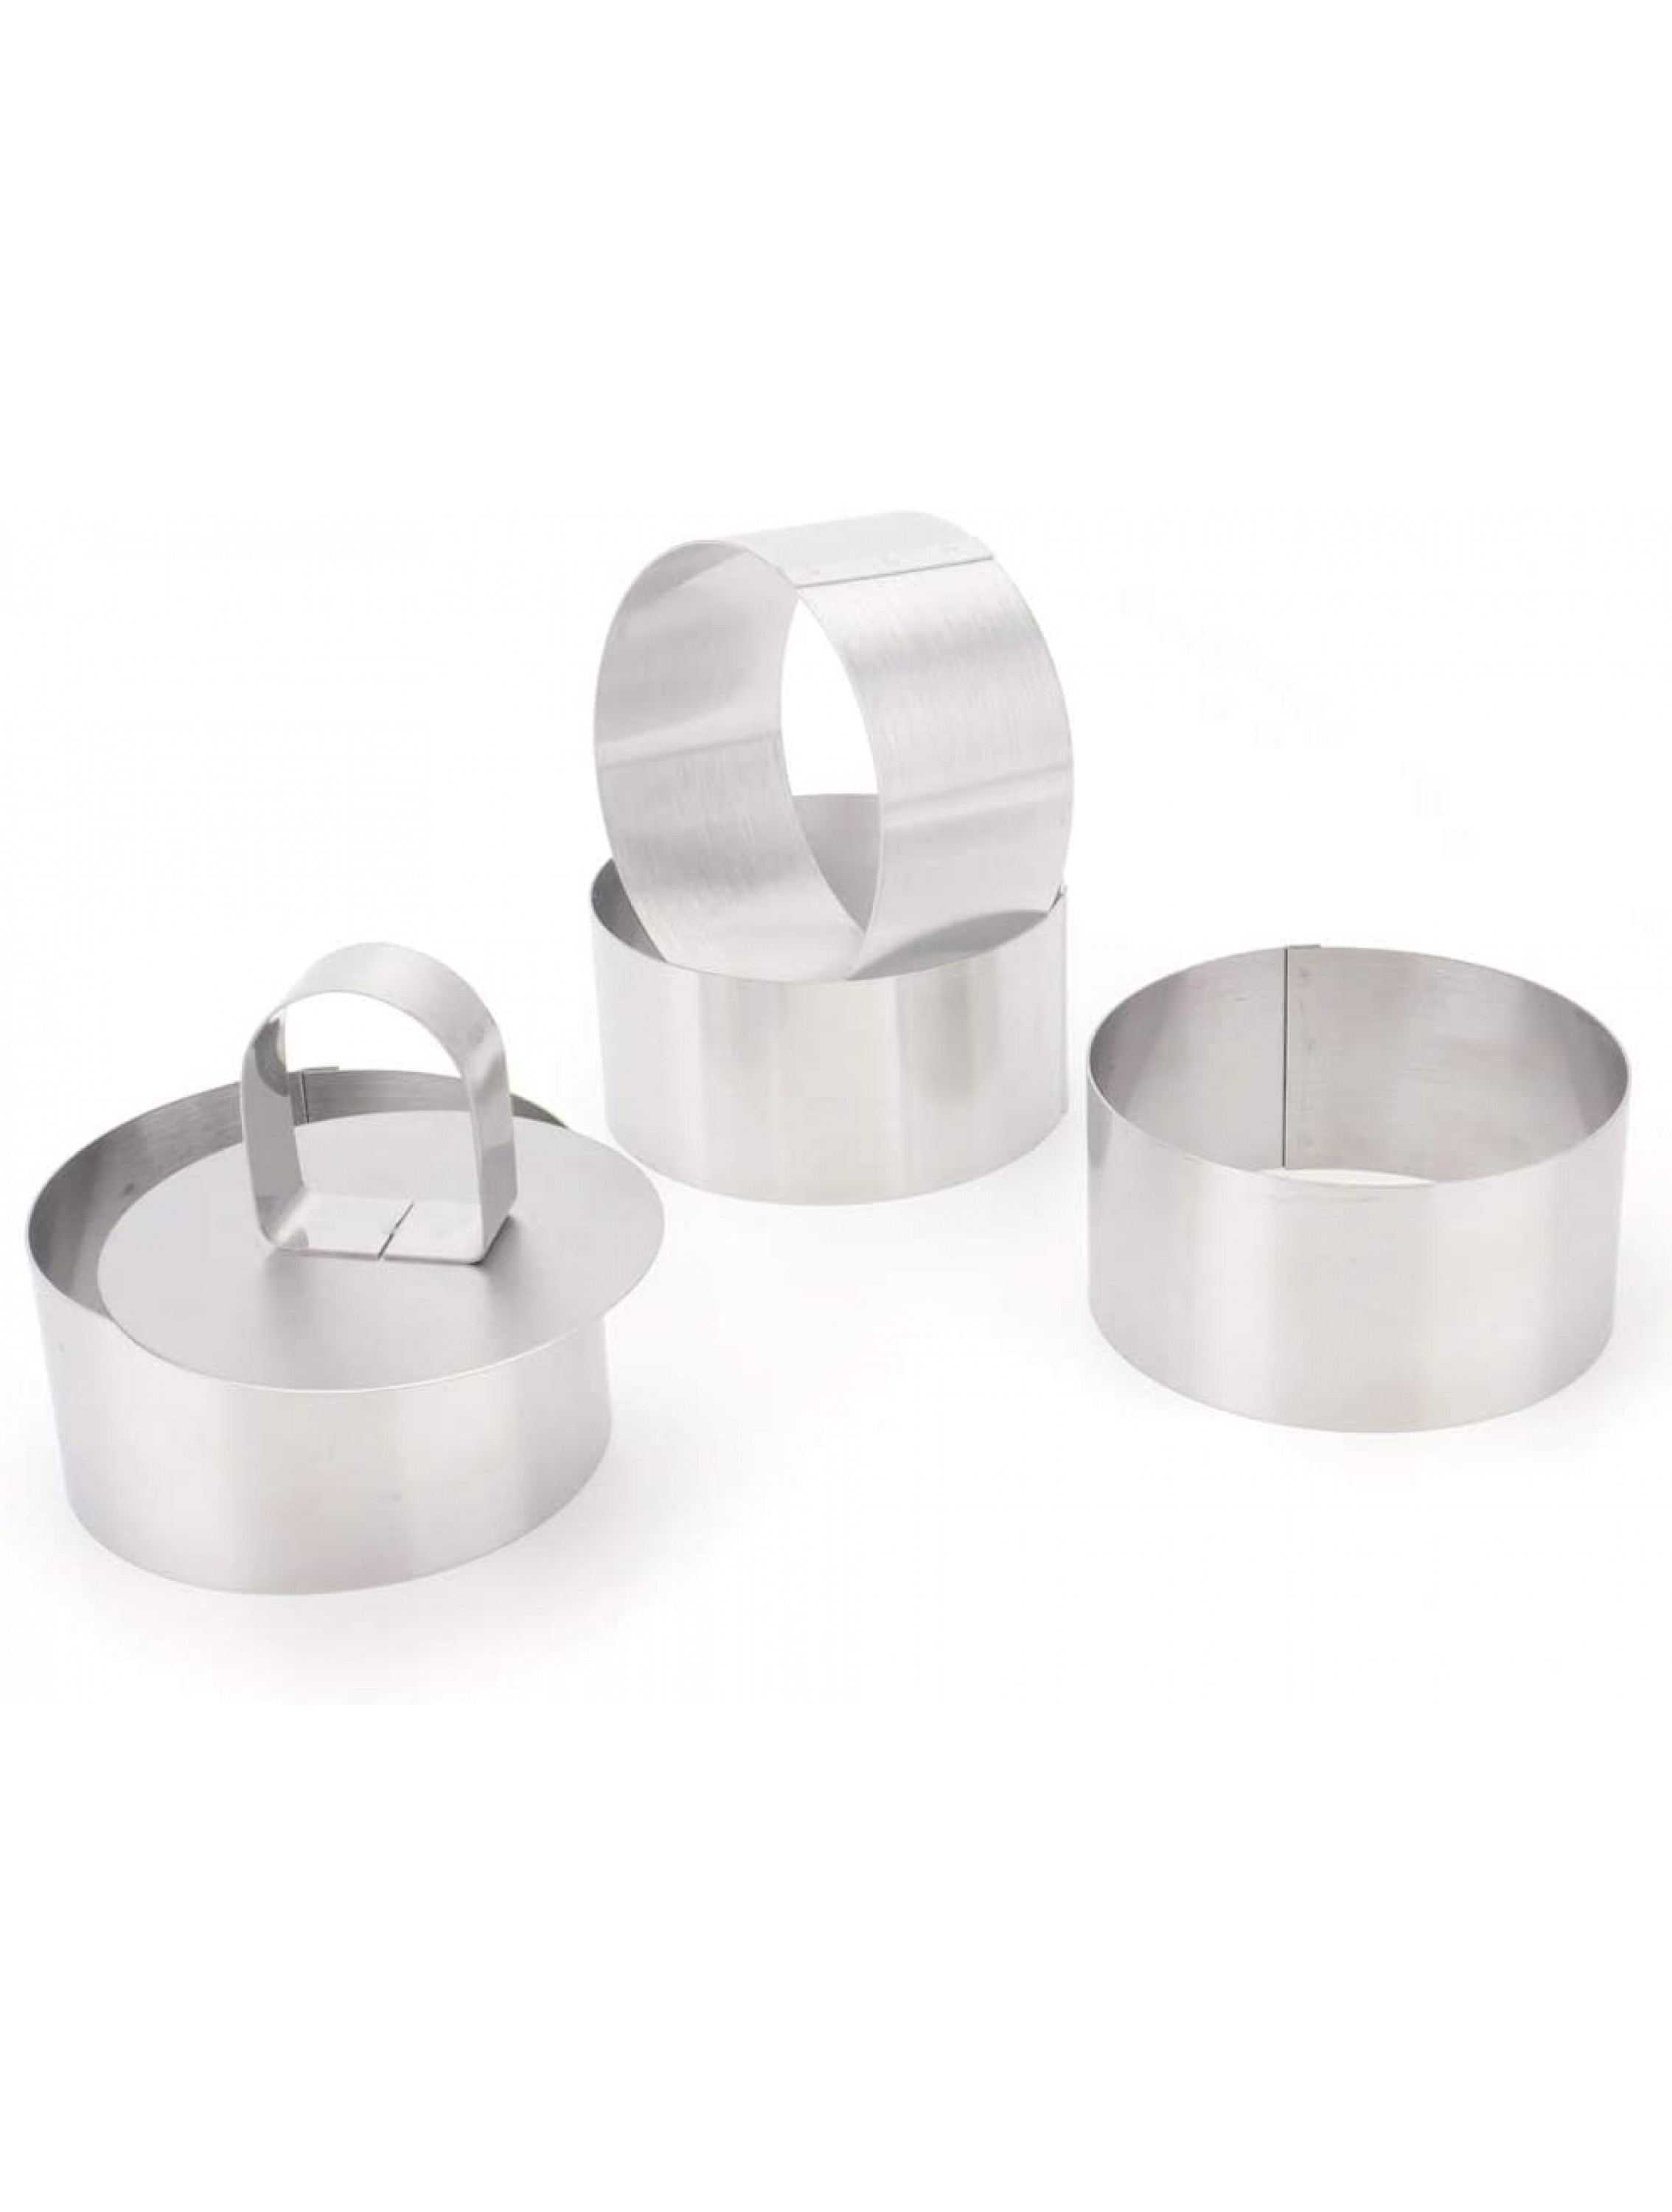 Tebery 3-Inch Stainless Steel Cake Rings Cake Mousse Mold for Pastry Cake Mousse and Pancake Set of 4 with 1 Pusher - BLK69BCEL